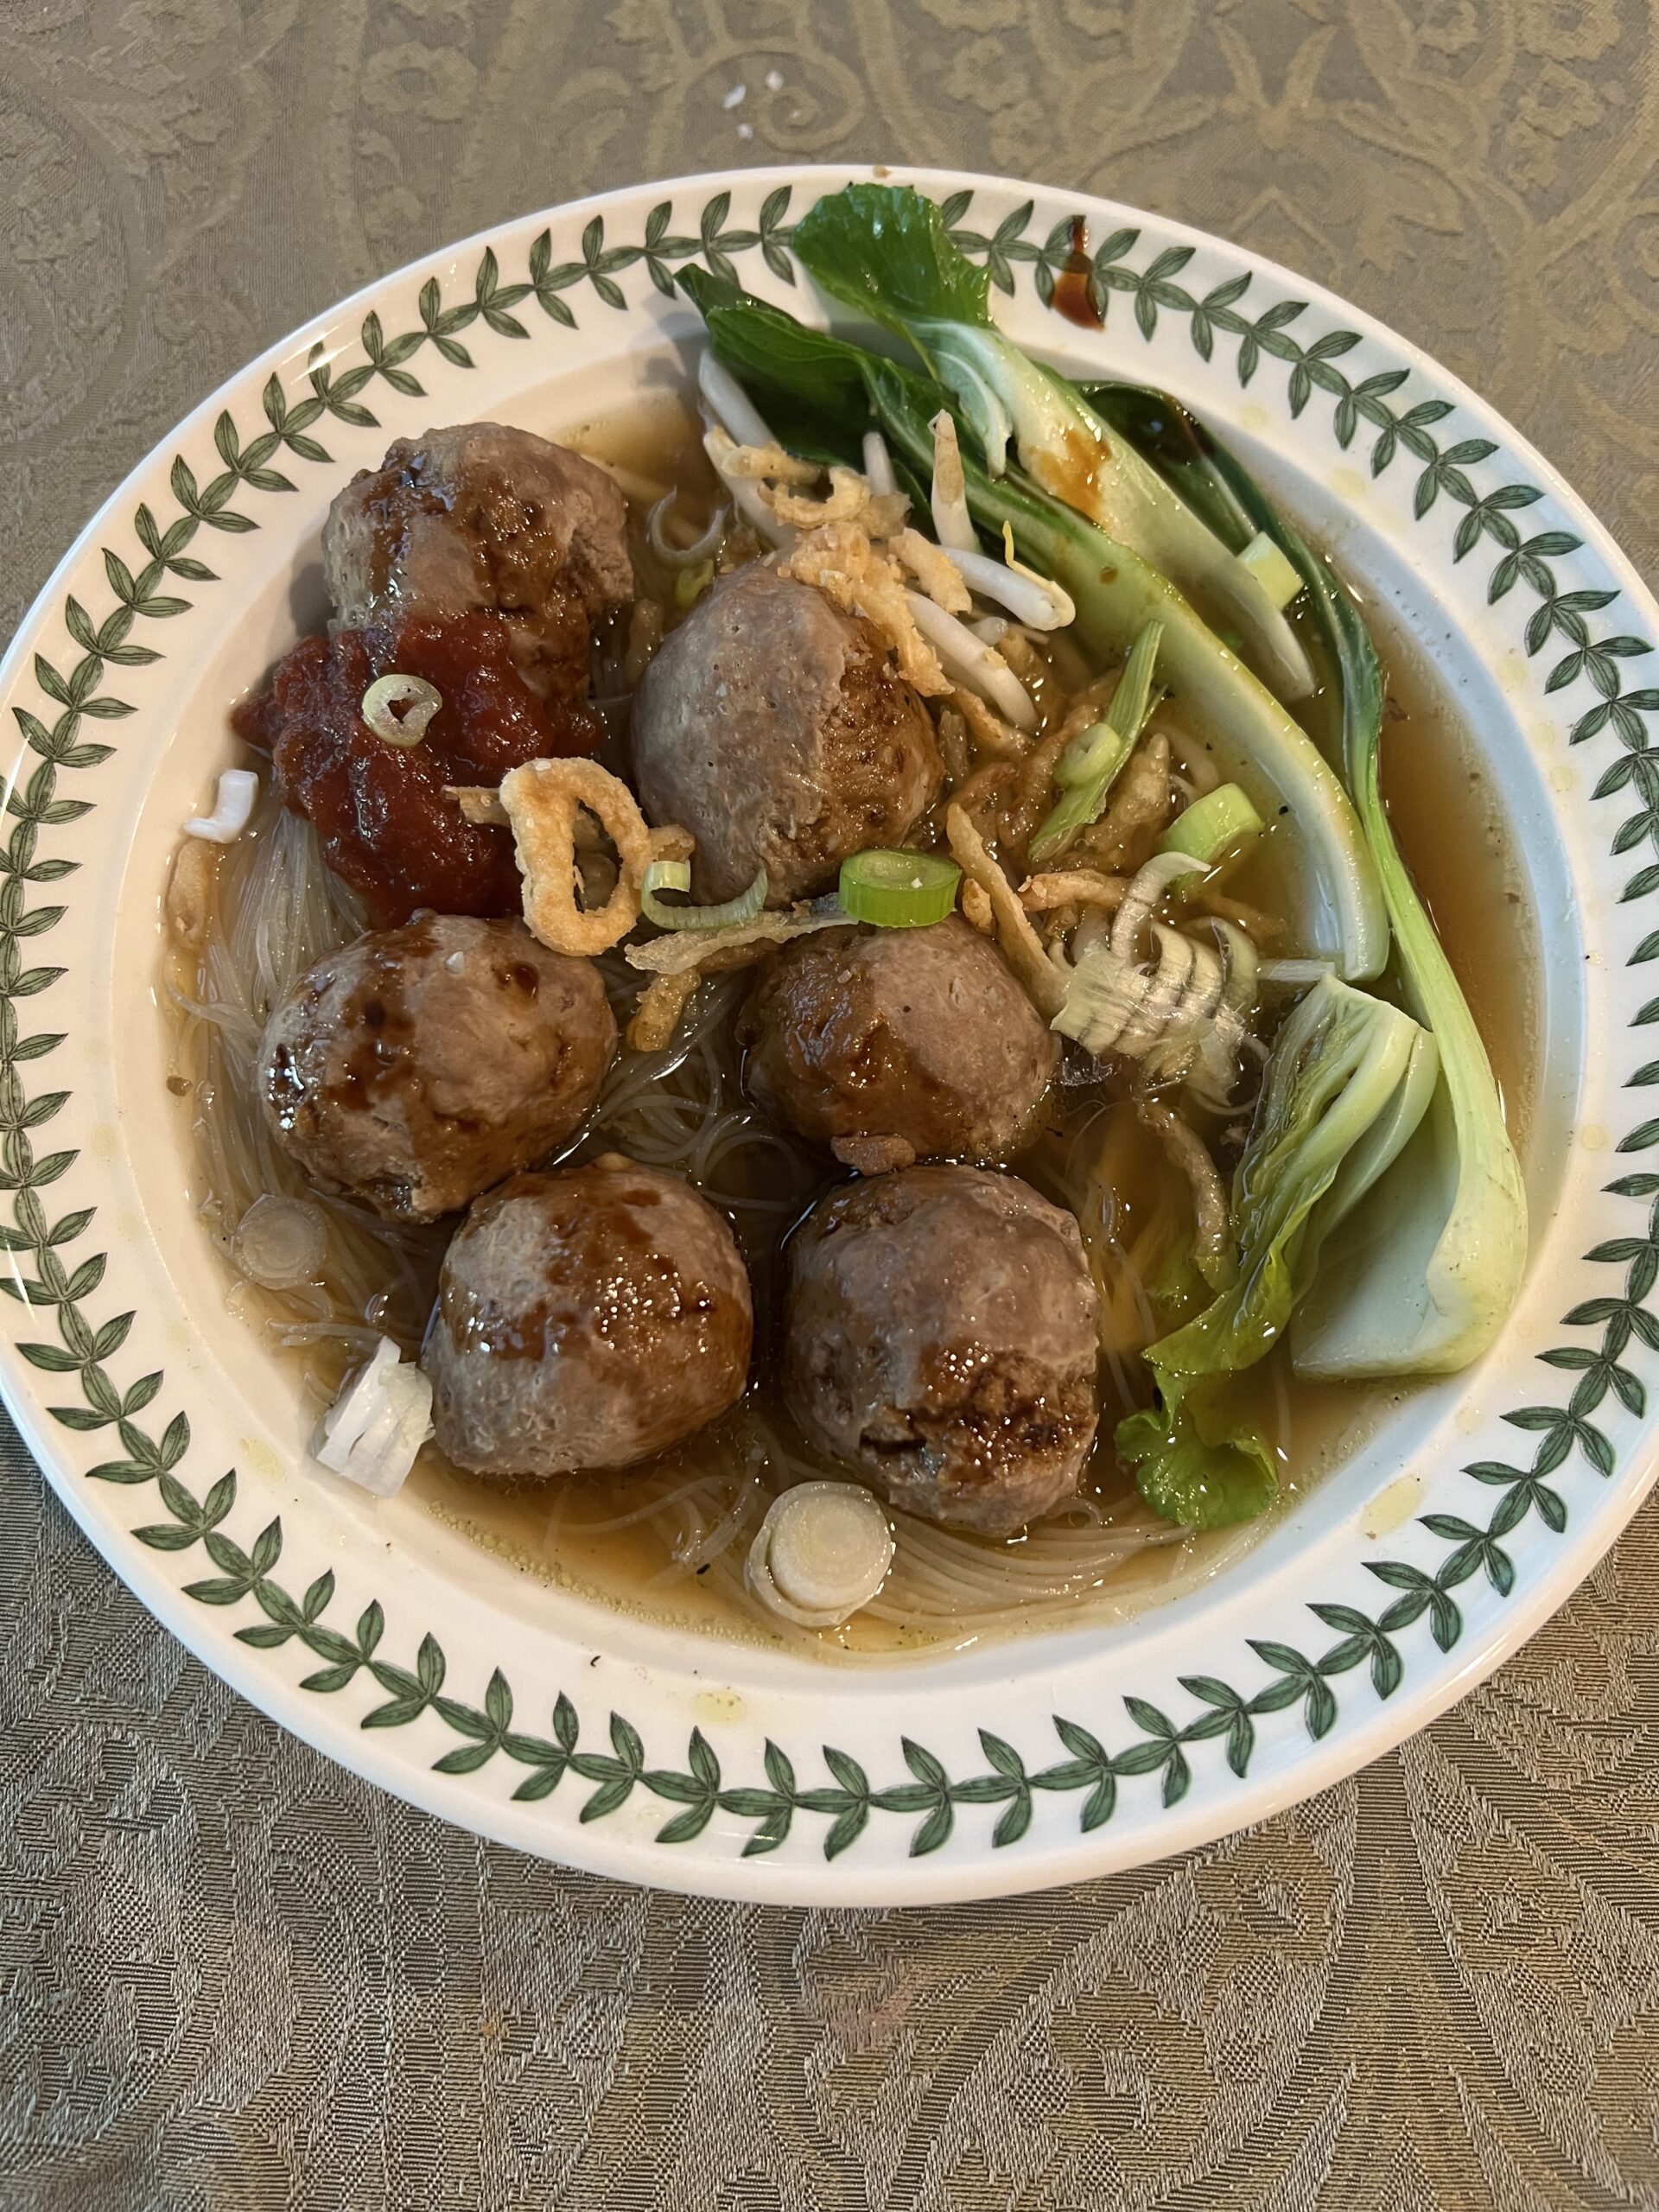 Finished lamb bakso recipe plated up to serve